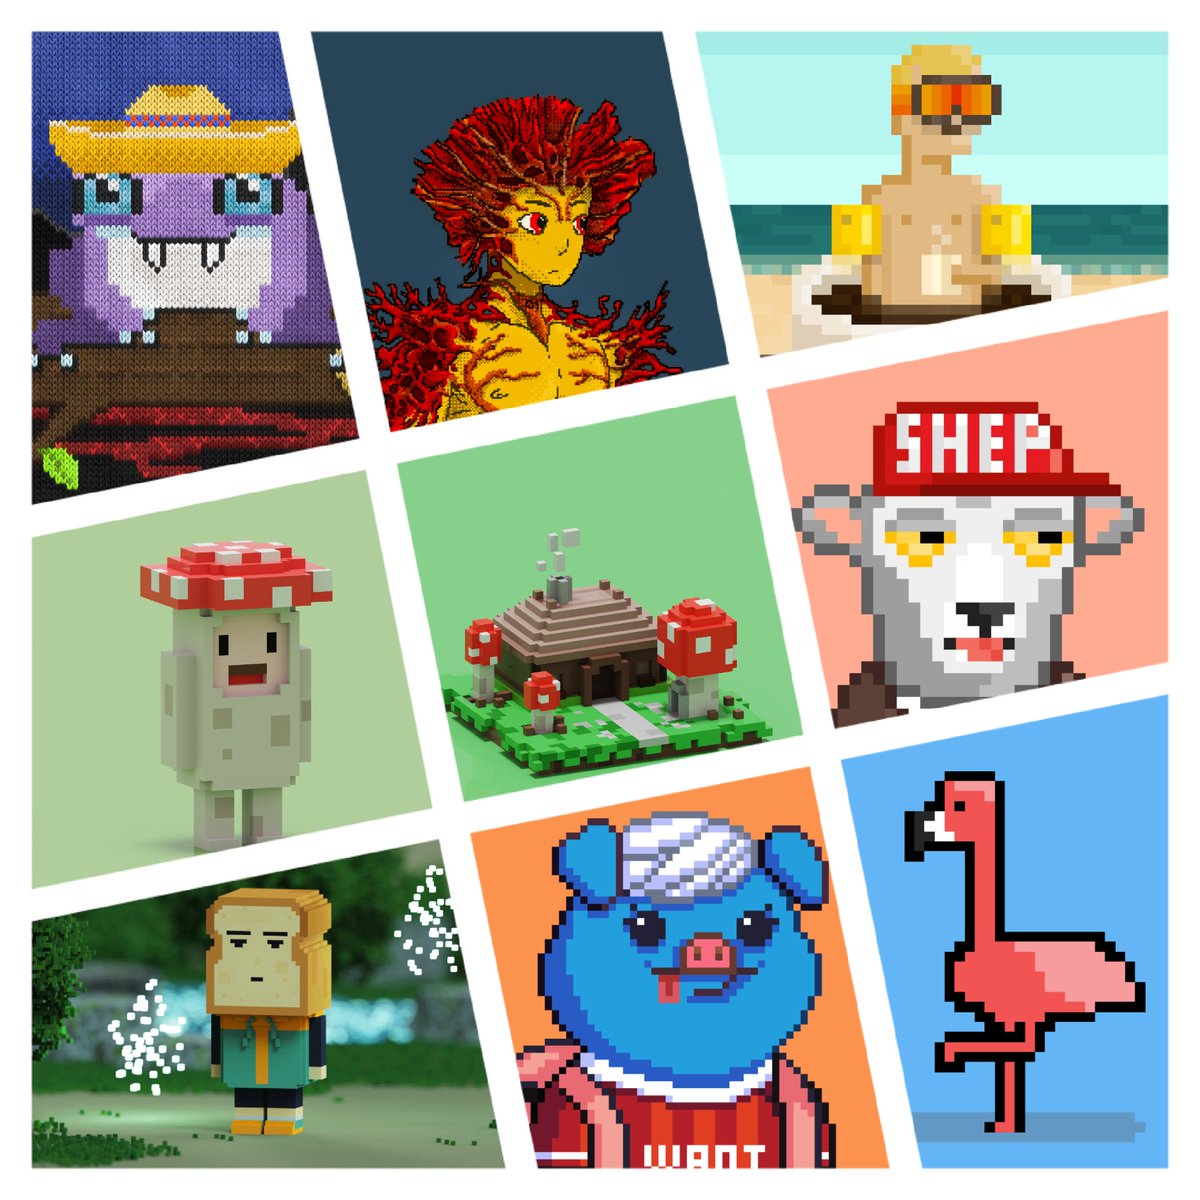 🧵Hey guys, let's talk about Voxel and Pixelart. In this thread, I will explain why the following projects are gems 💎 in the Algo NFT- space. @AlgoKnitter @theseafolk @coffeebits_nft @ALGOMONZ / @MONZVERSE @BreadHead_Gang @ShepNFTs @Oink2YeahClub @yieldling